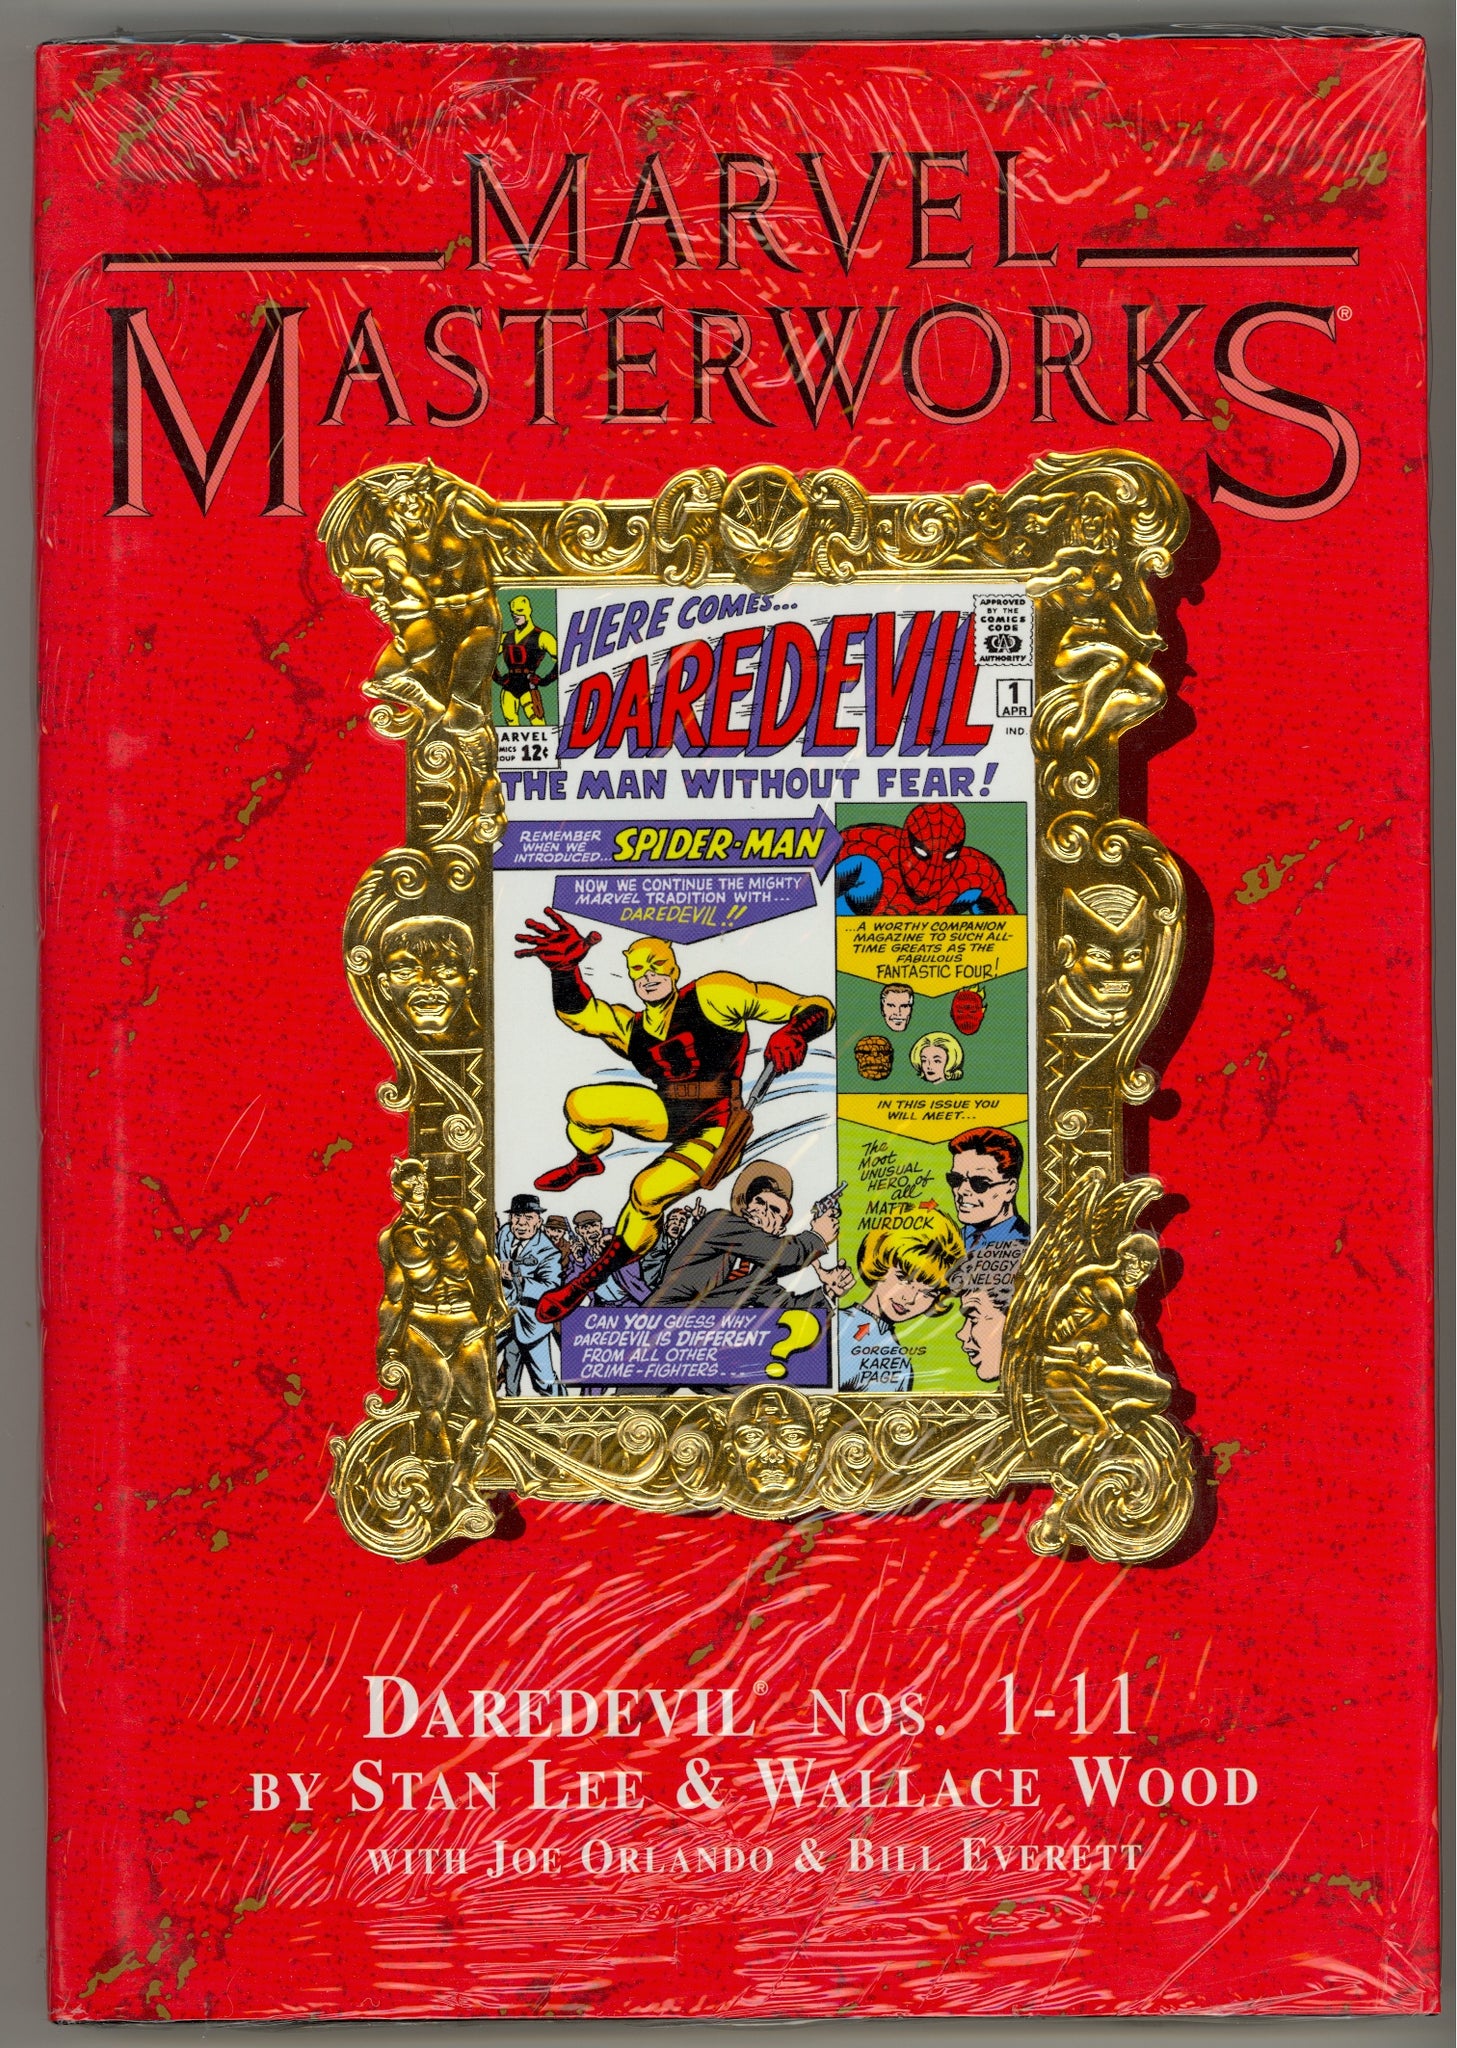 Marvel Masterworks volume 17 Daredevil issues 1-11, Limited Collectors Edition